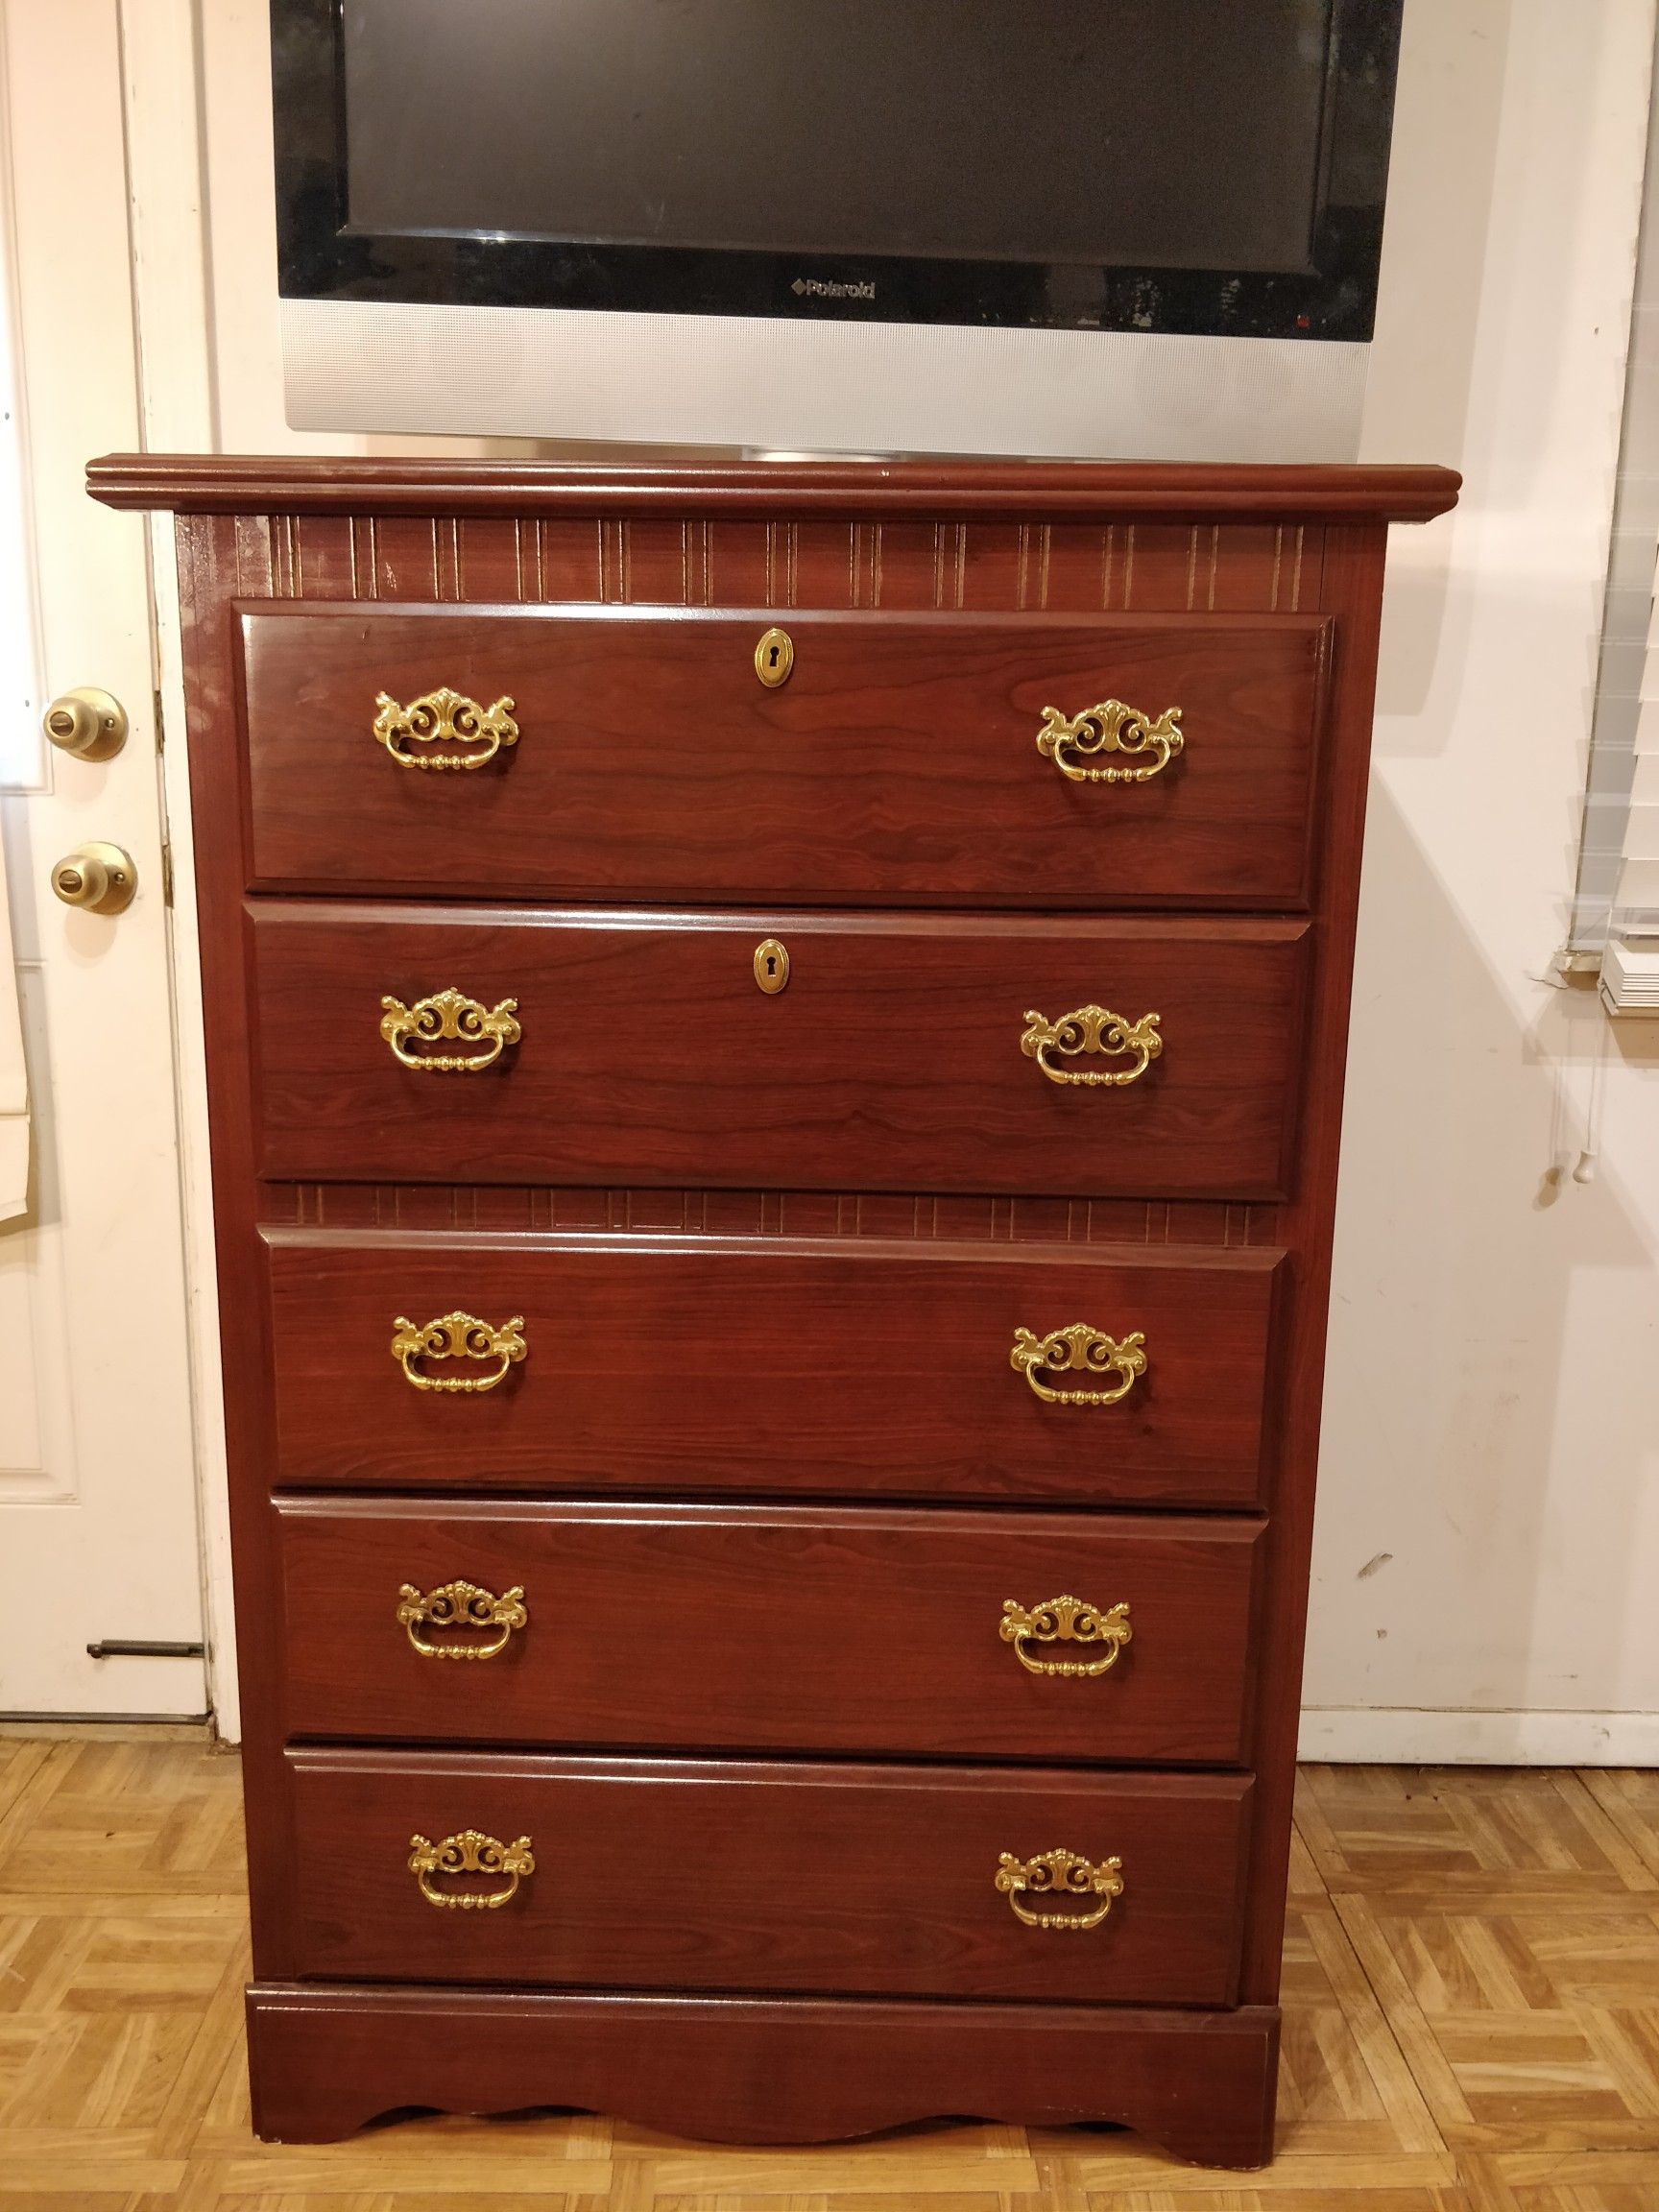 Like new chest dresser in great condition, all drawers sliding smoothly, pet free smoke free. L32"*W16.5"*H46"